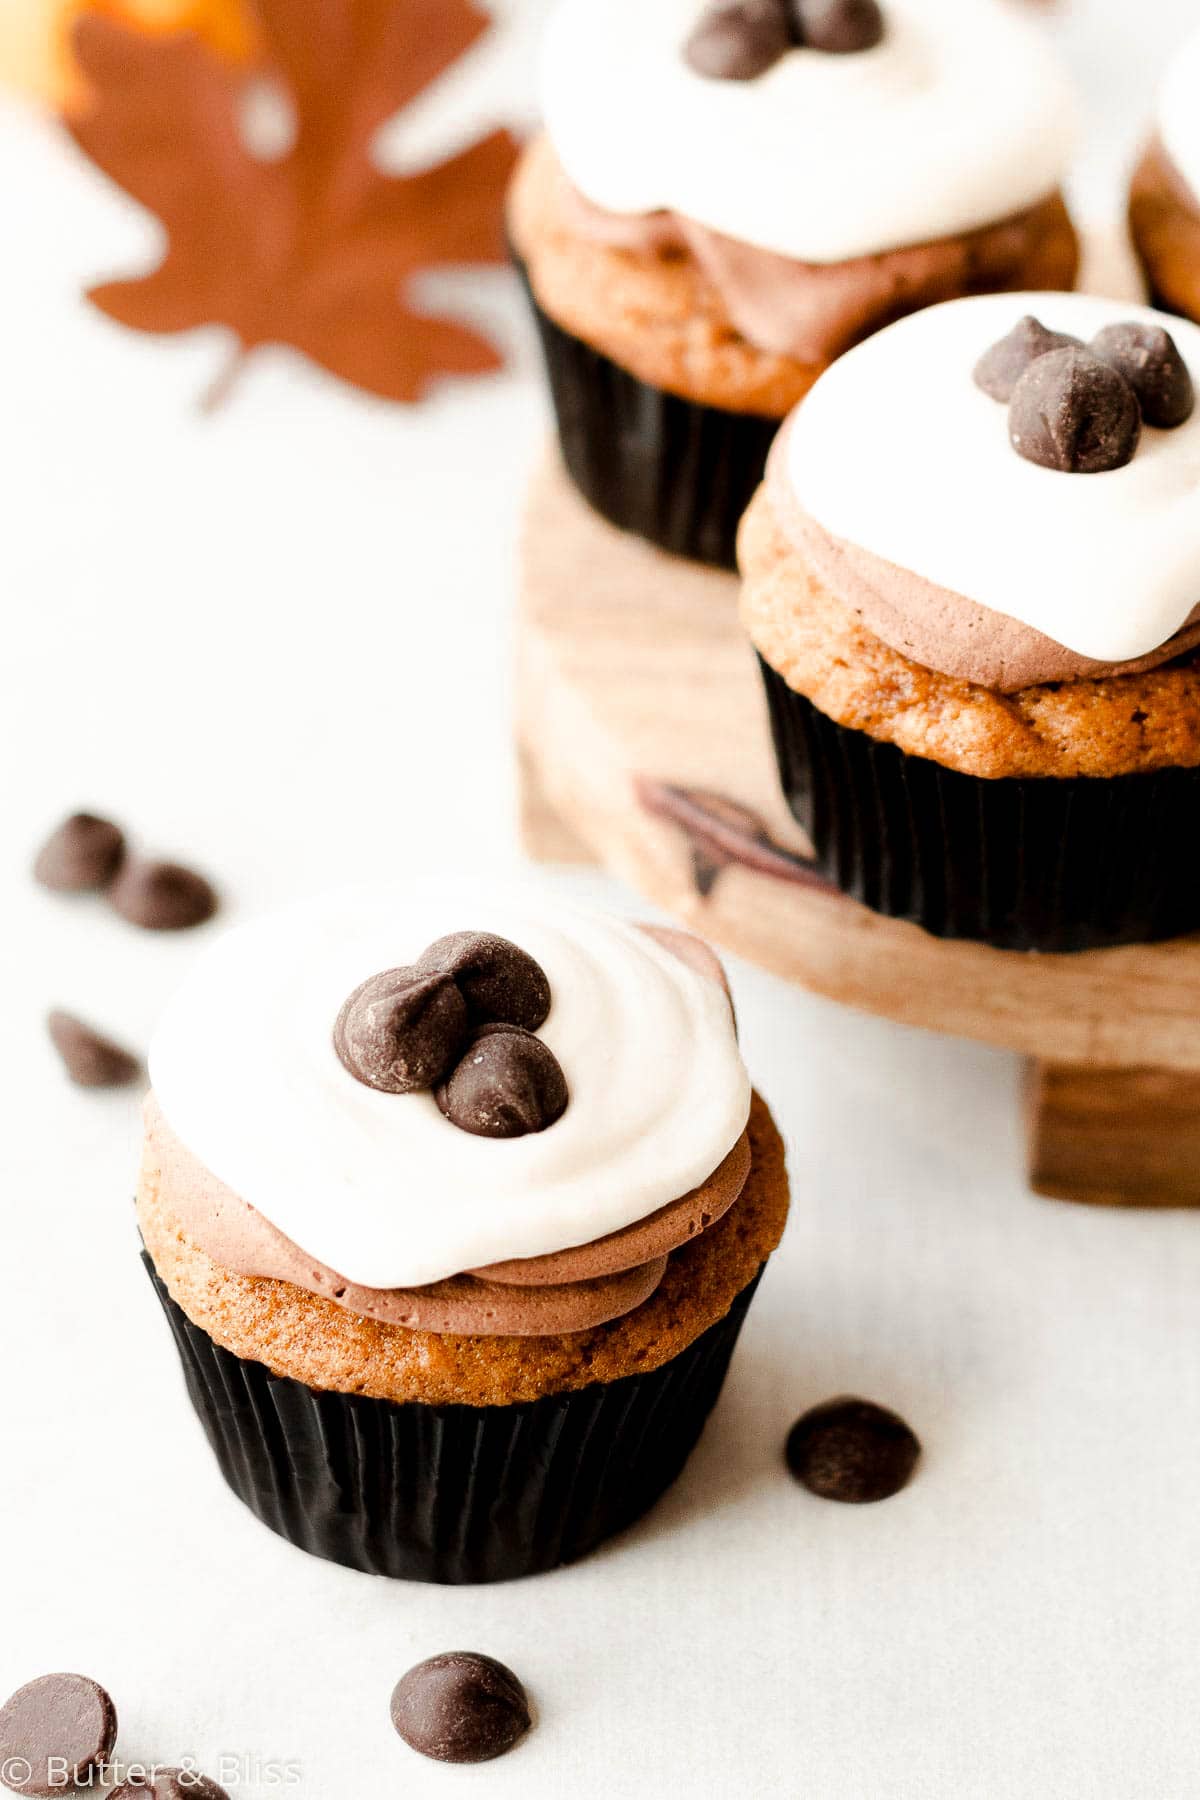 Pretty pumpkin cupcakes with chocolate and cream cheese frosting on a table.